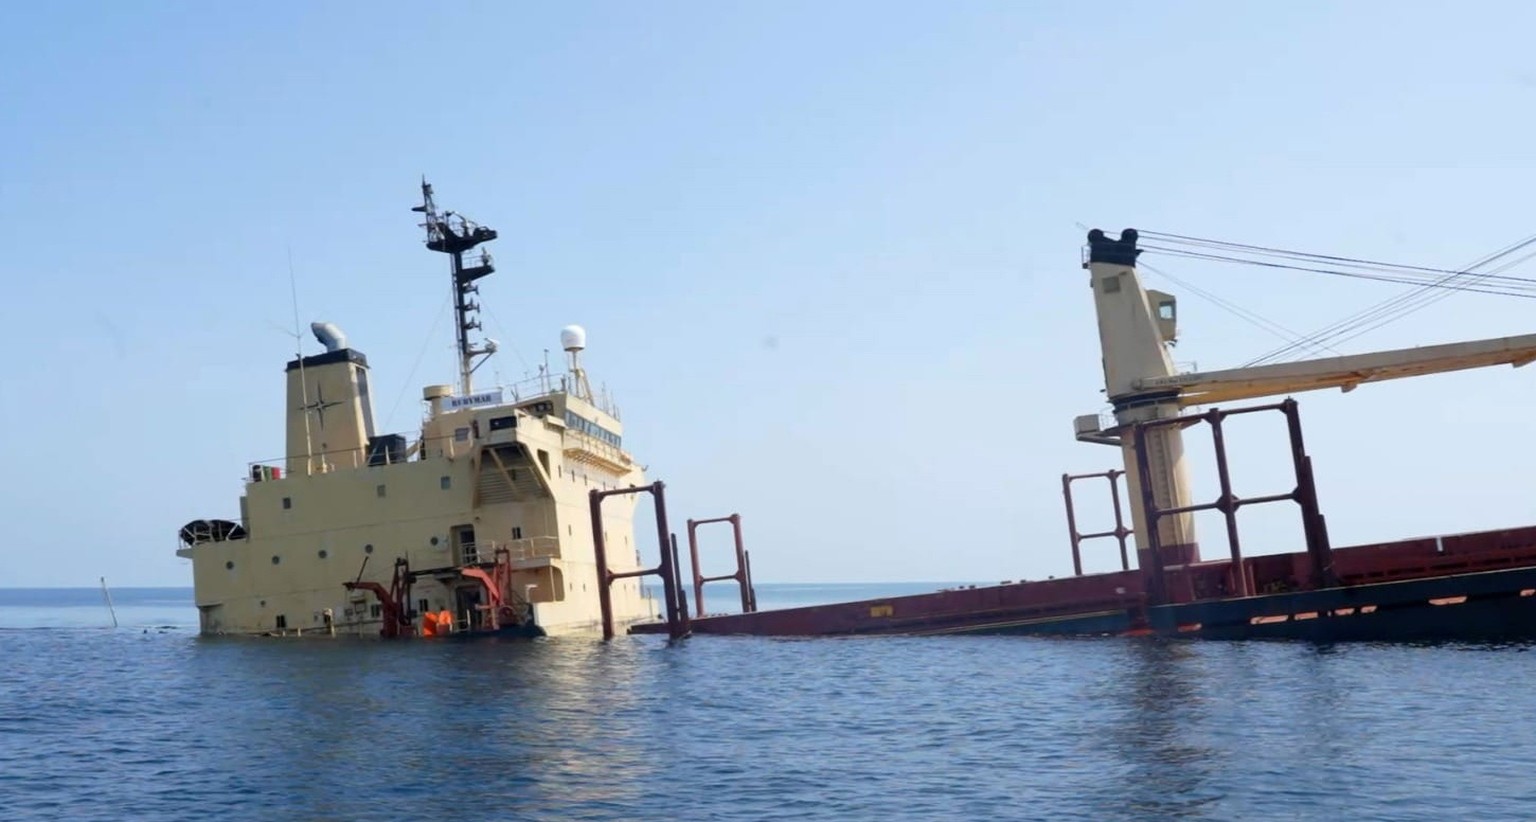 epa11184516 A handout photo made available by Yemeni Al-Joumhouriya TV shows the British-registered cargo vessel, Rubymar, sinking after being damaged in a missile attack by the Houthis in the Red Sea ...